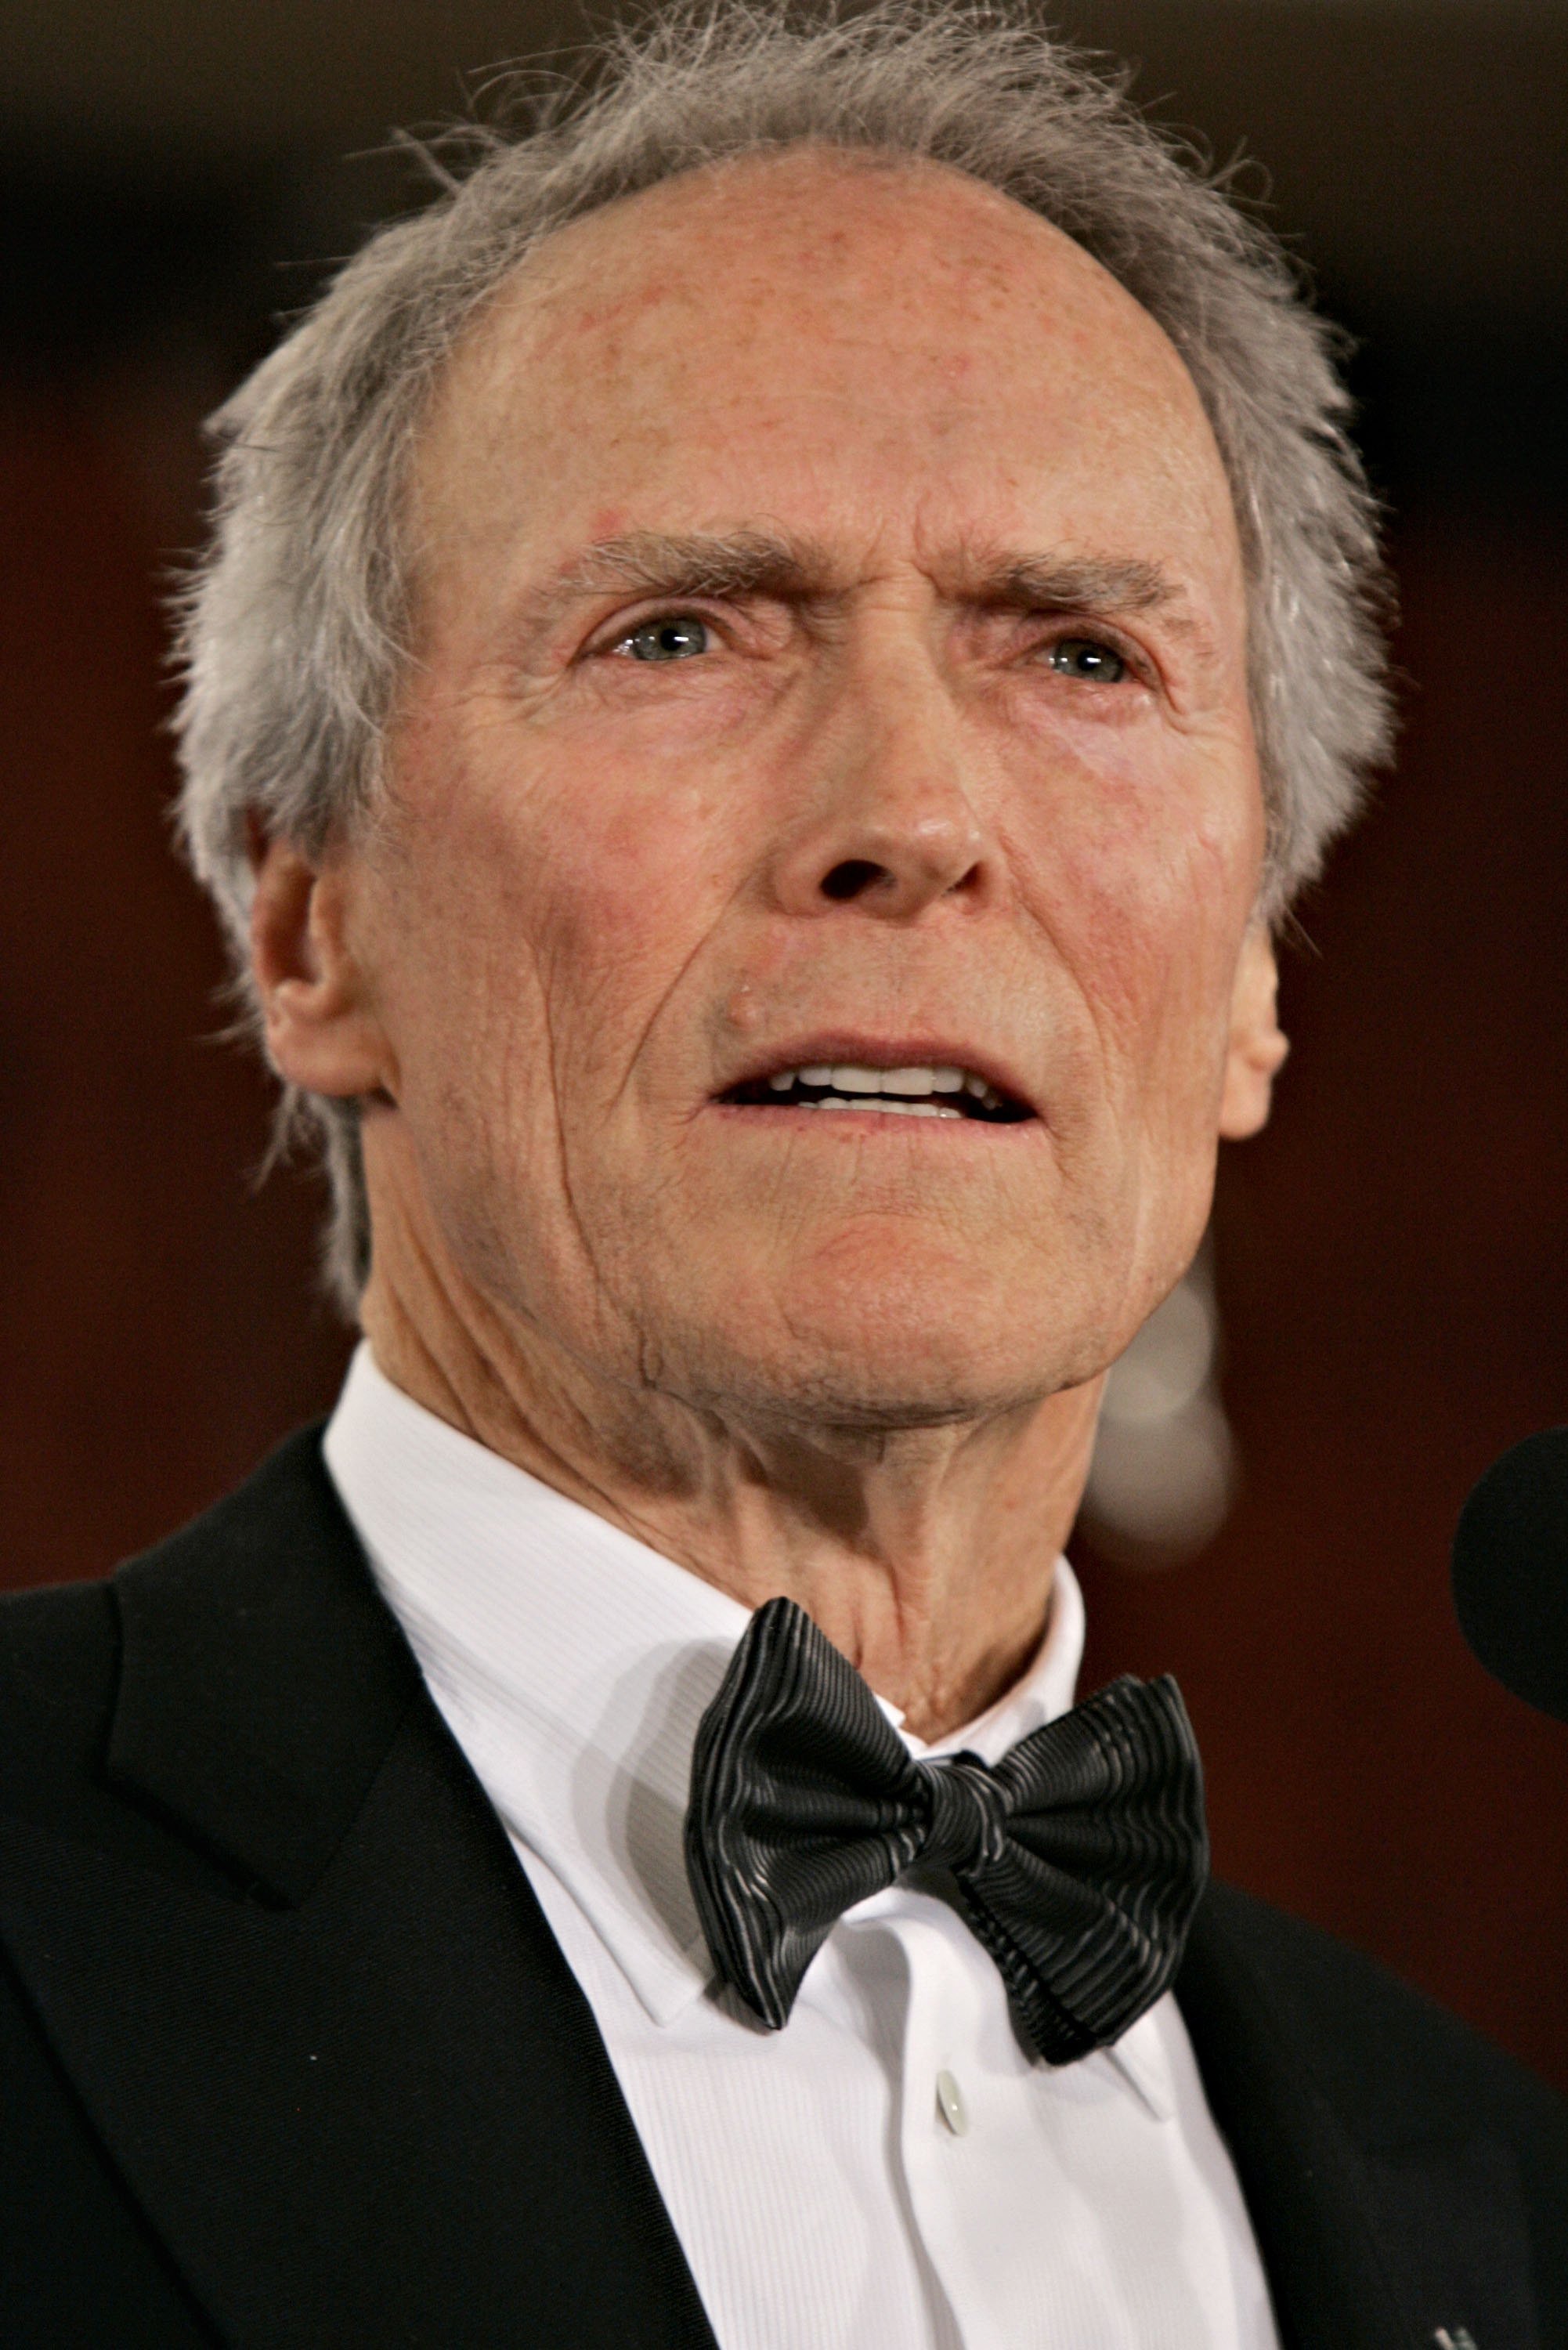 Clint Eastwood at the 58th Annual Directors Guild Of America Awards on January 28, 2006 | Photo: GettyImages